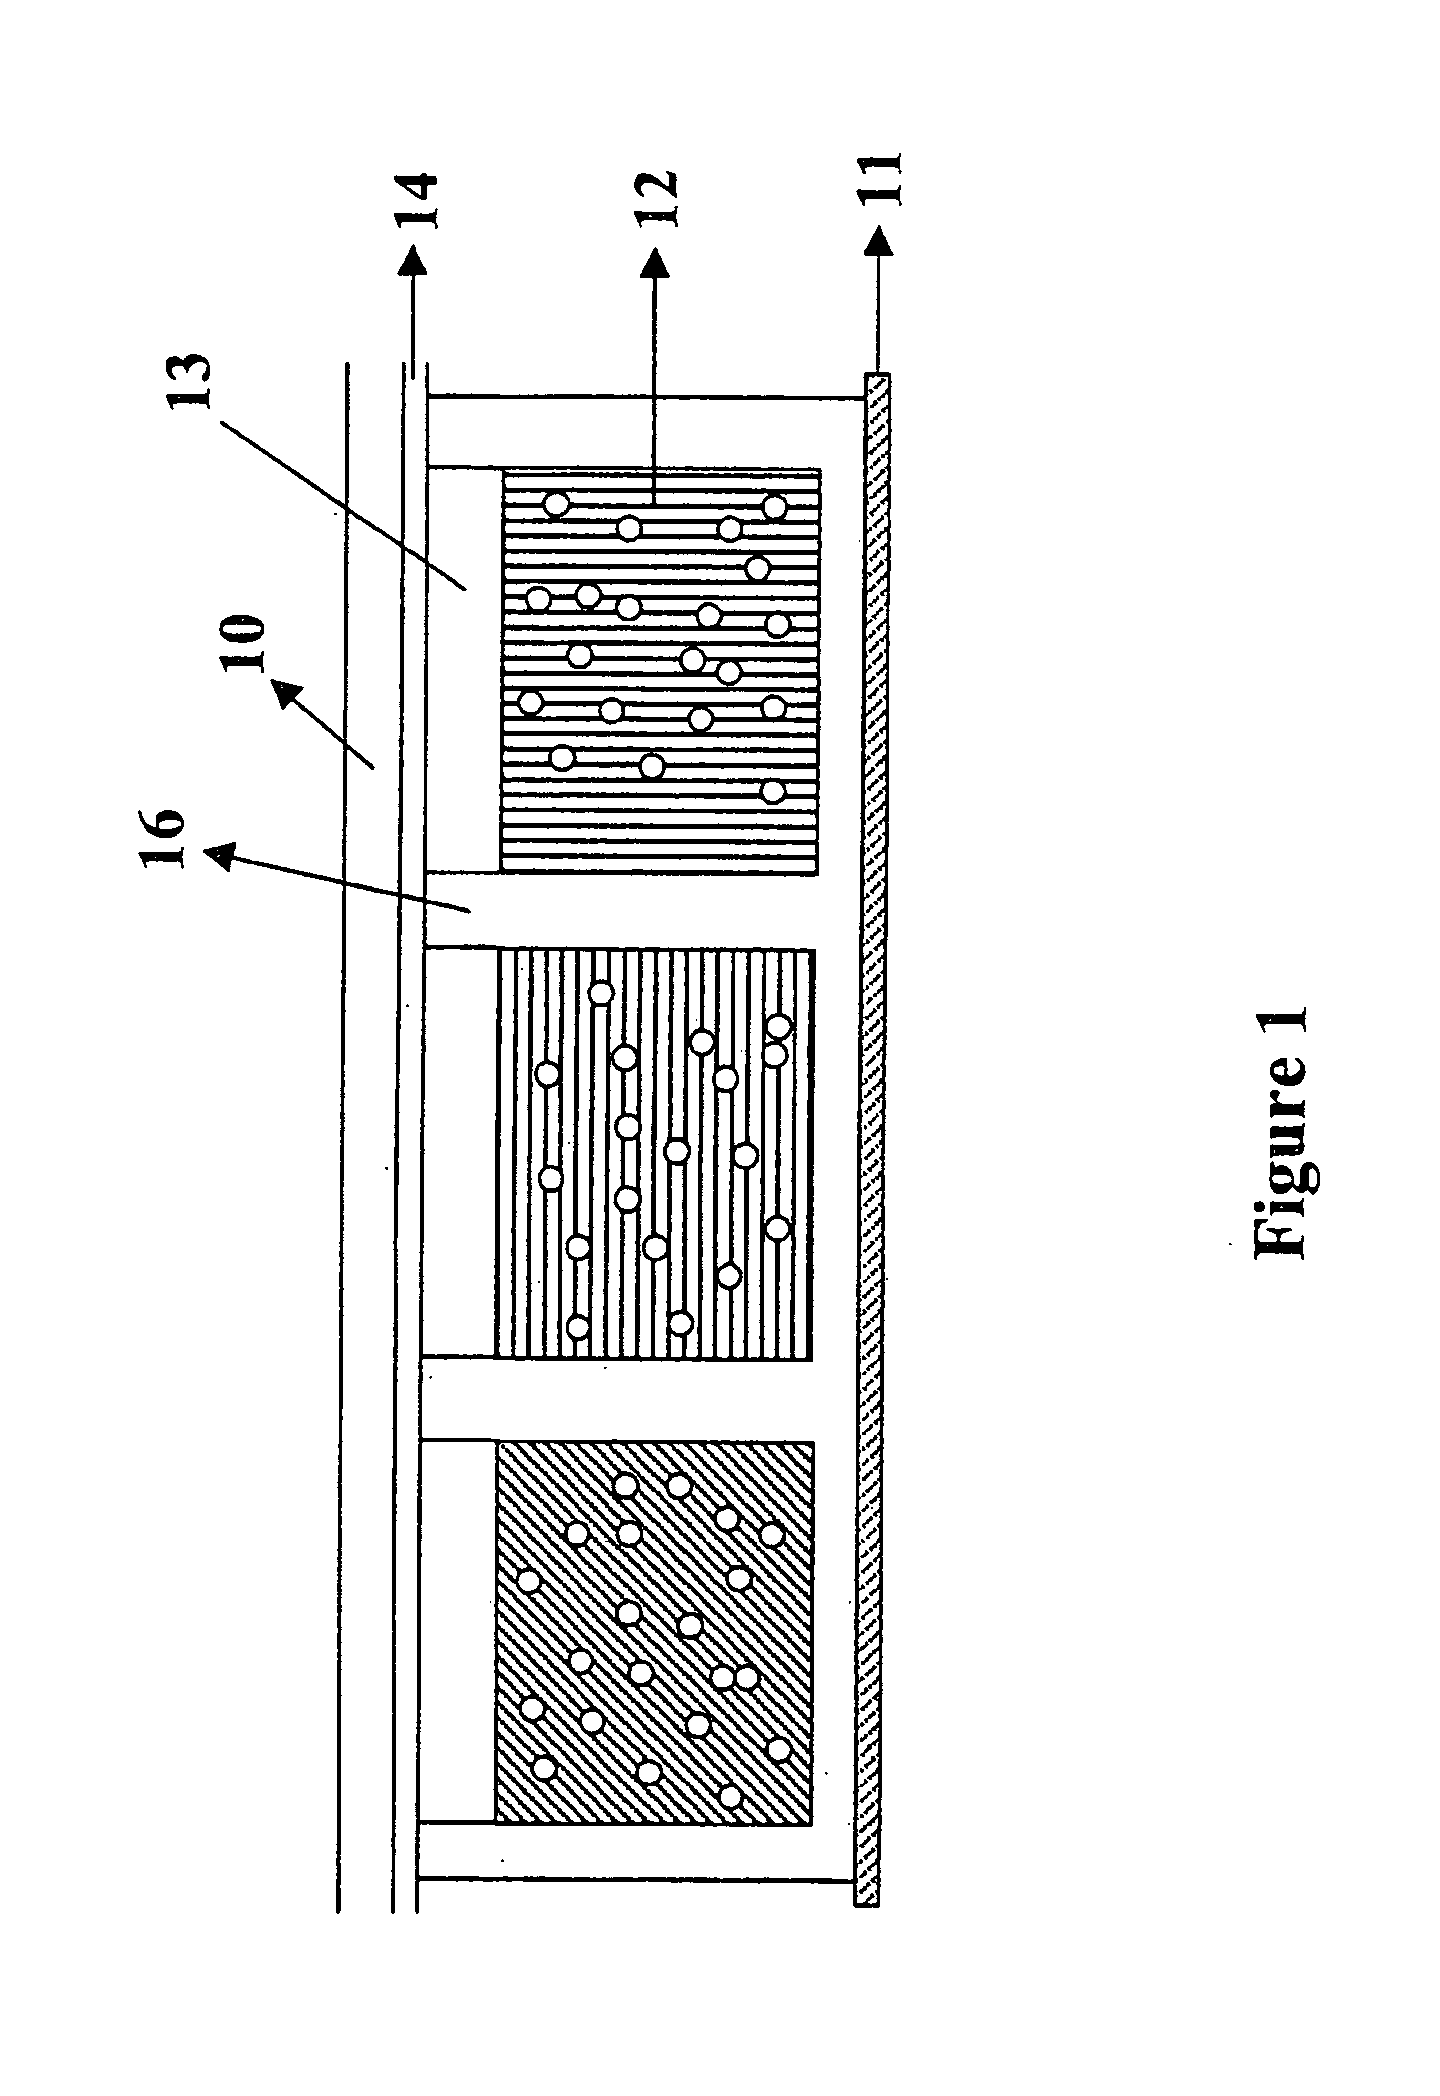 Composition and process for the manufacture of an improved electrophoretic display